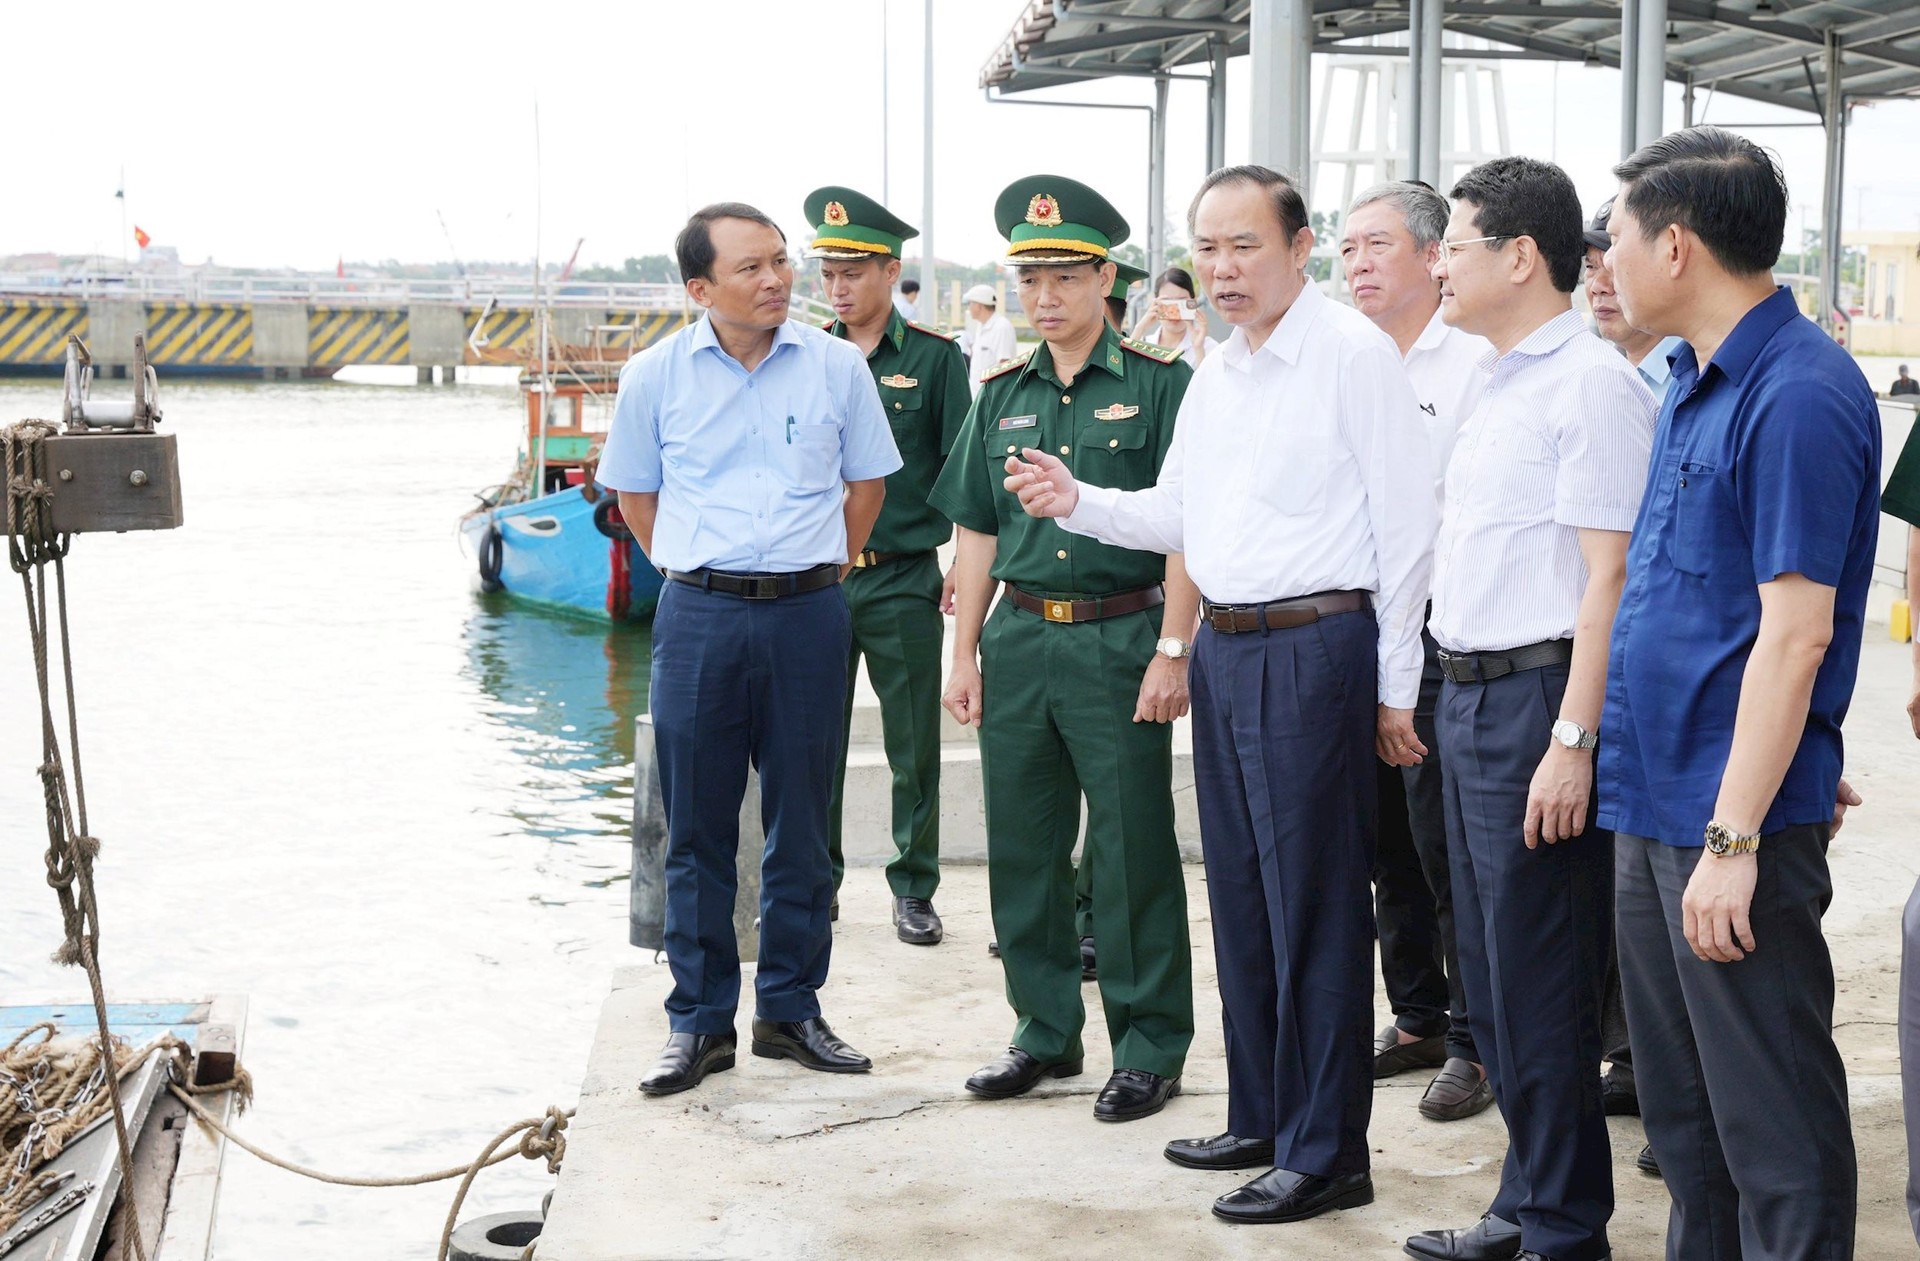 Deputy Minister Phung Duc Tien has just inspected the situation in combating IUU fishing in Thua Thien-Hue.